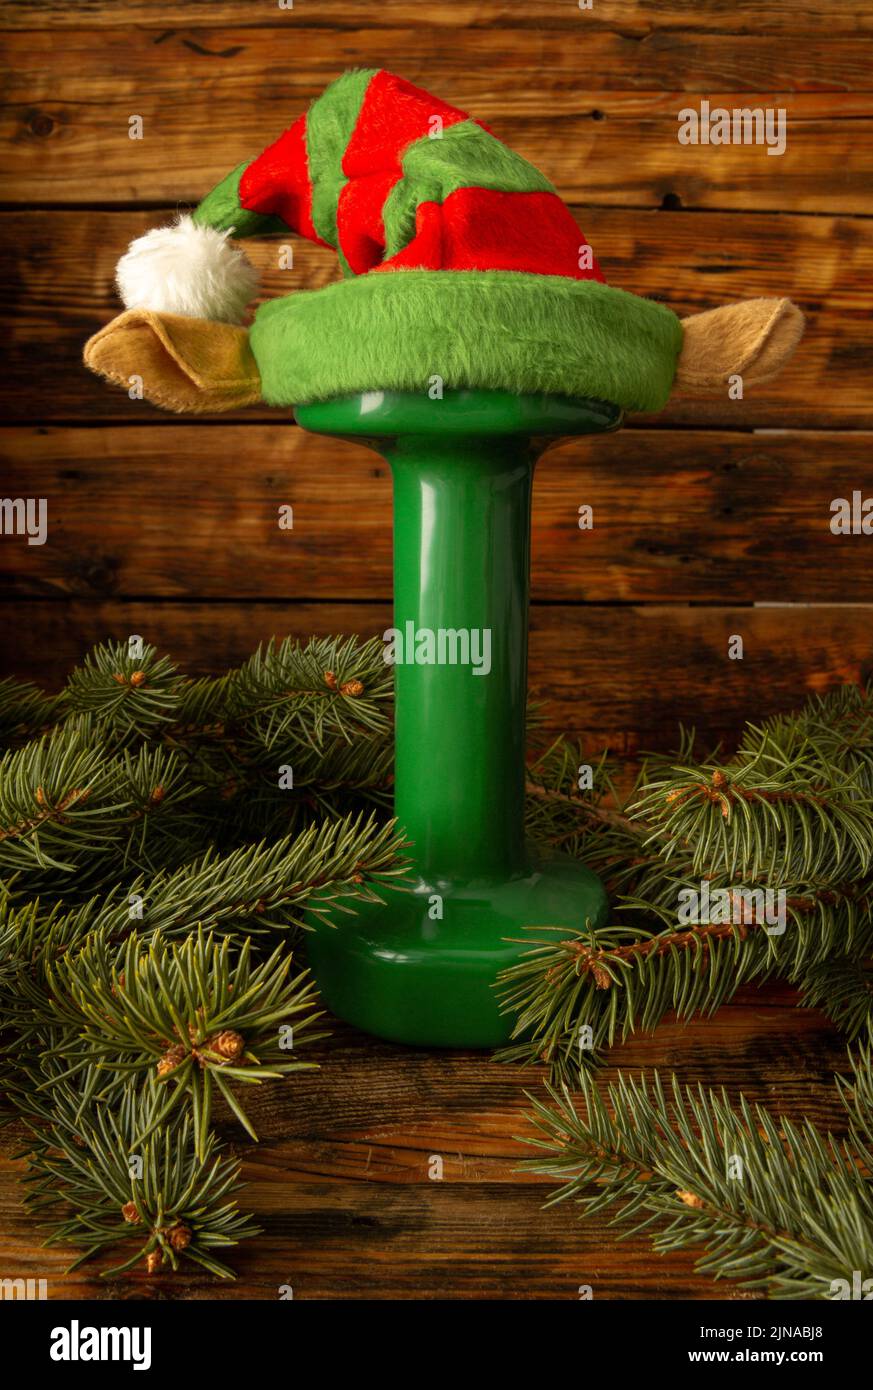 Green dumbbell with elf hat. Exercise equipment as a Christmas gift idea. Gym fitness holiday season concept, composition with tree branches. Stock Photo